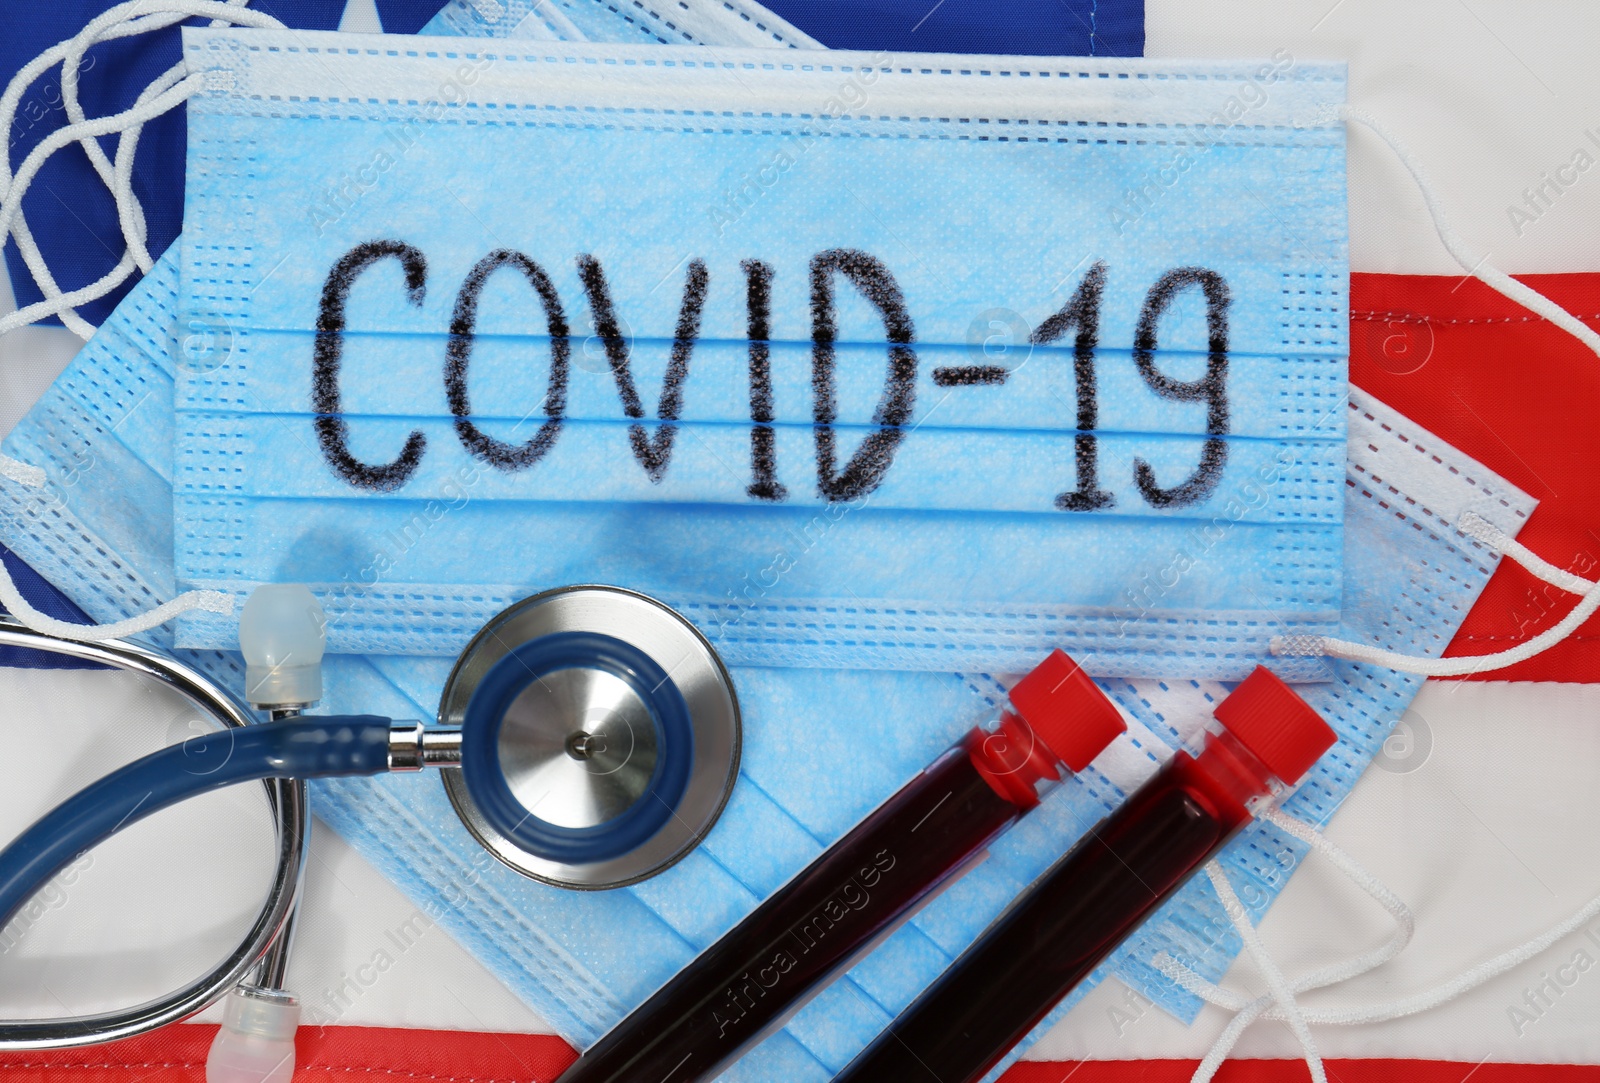 Photo of COVID-19 written on protective mask, test tubes with blood, stethoscope and American flag, flat lay. Coronavirus pandemic in USA